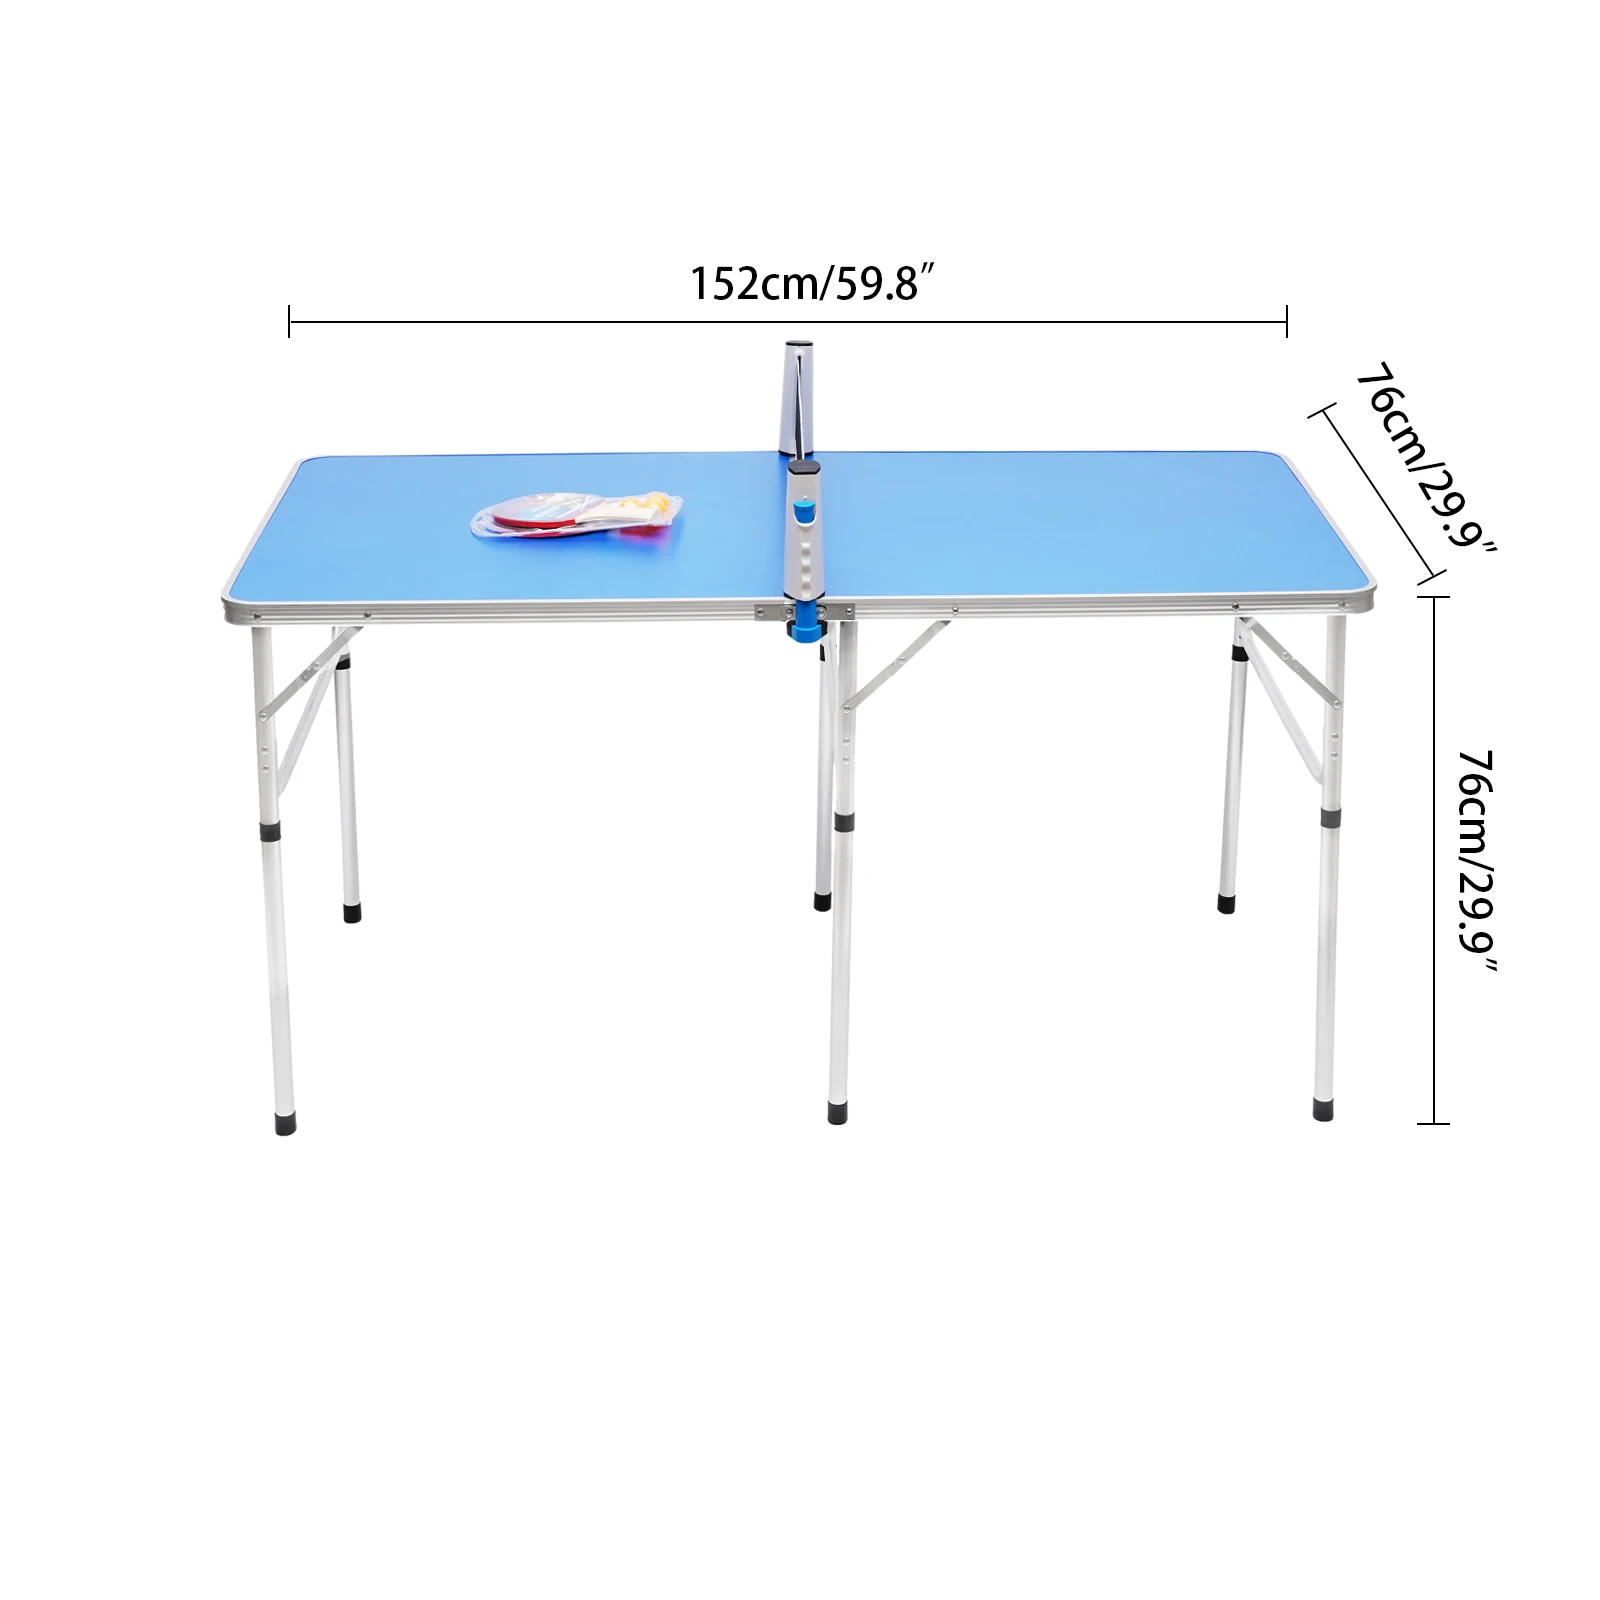 Portable Table Tennis Table Foldable PingPong Table with Net 2 PingPong Paddles Mid-Size Table Tennis Game Set forIndoor/Outdoor